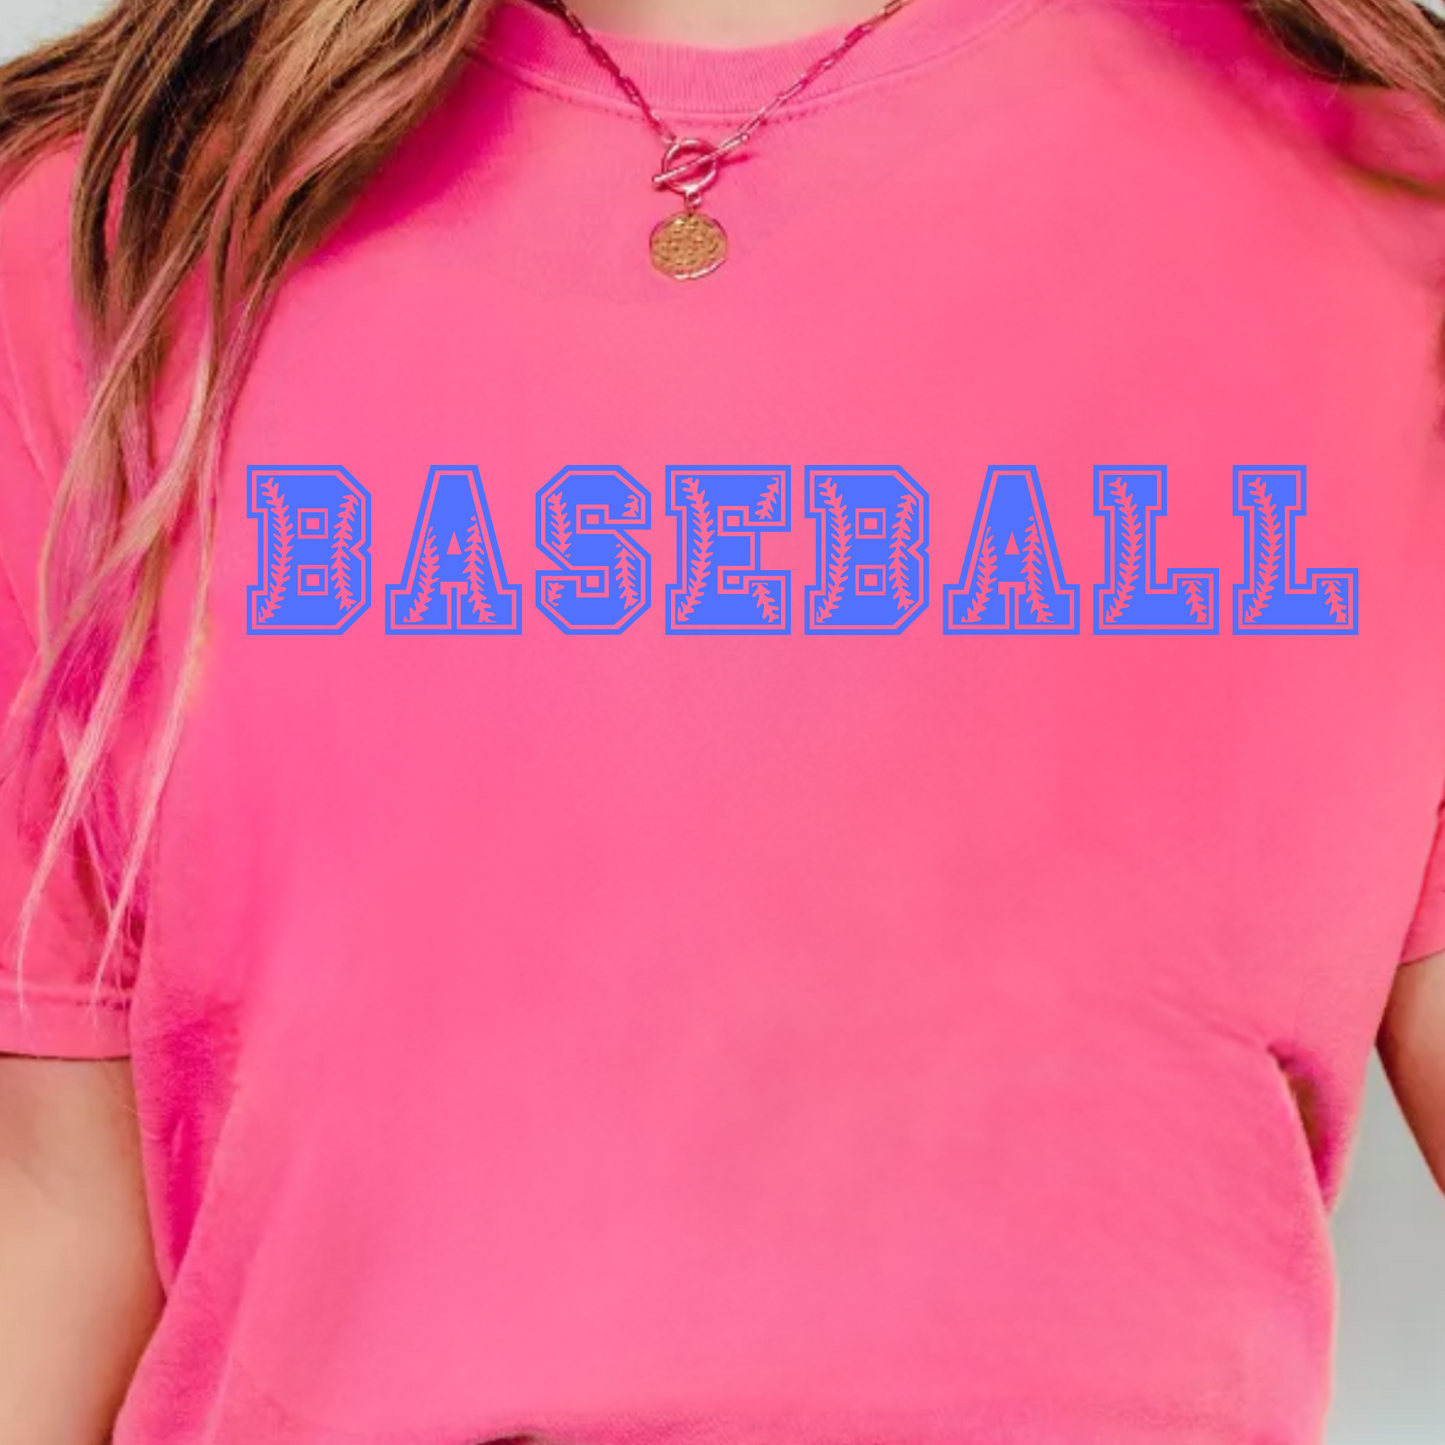 (shirt not included) Baseball lettering in Blue - Clear Film Transfer